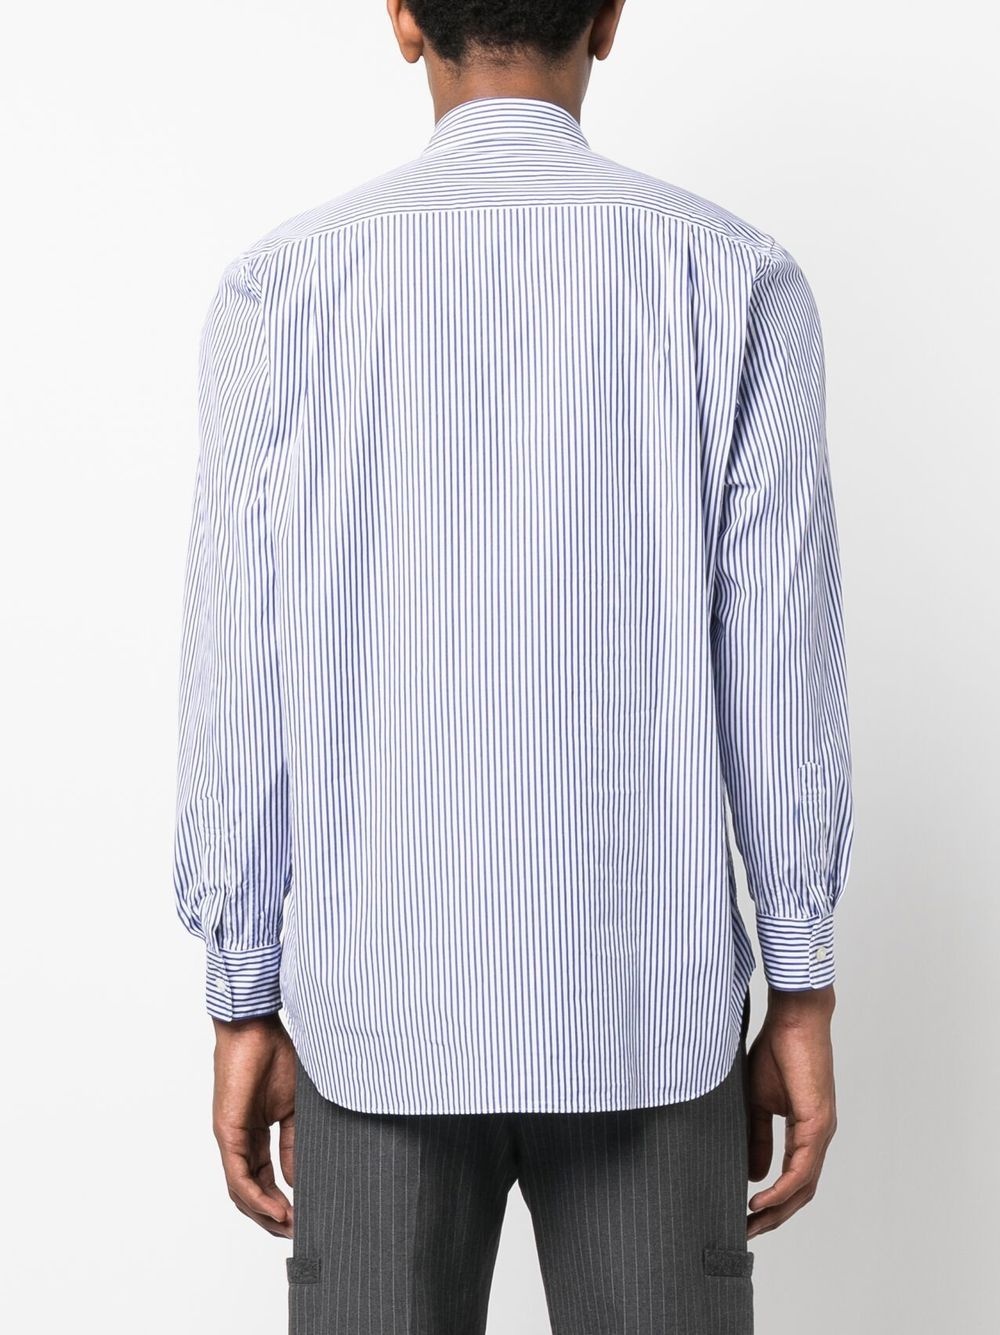 embroidered-logo striped shirt - 4